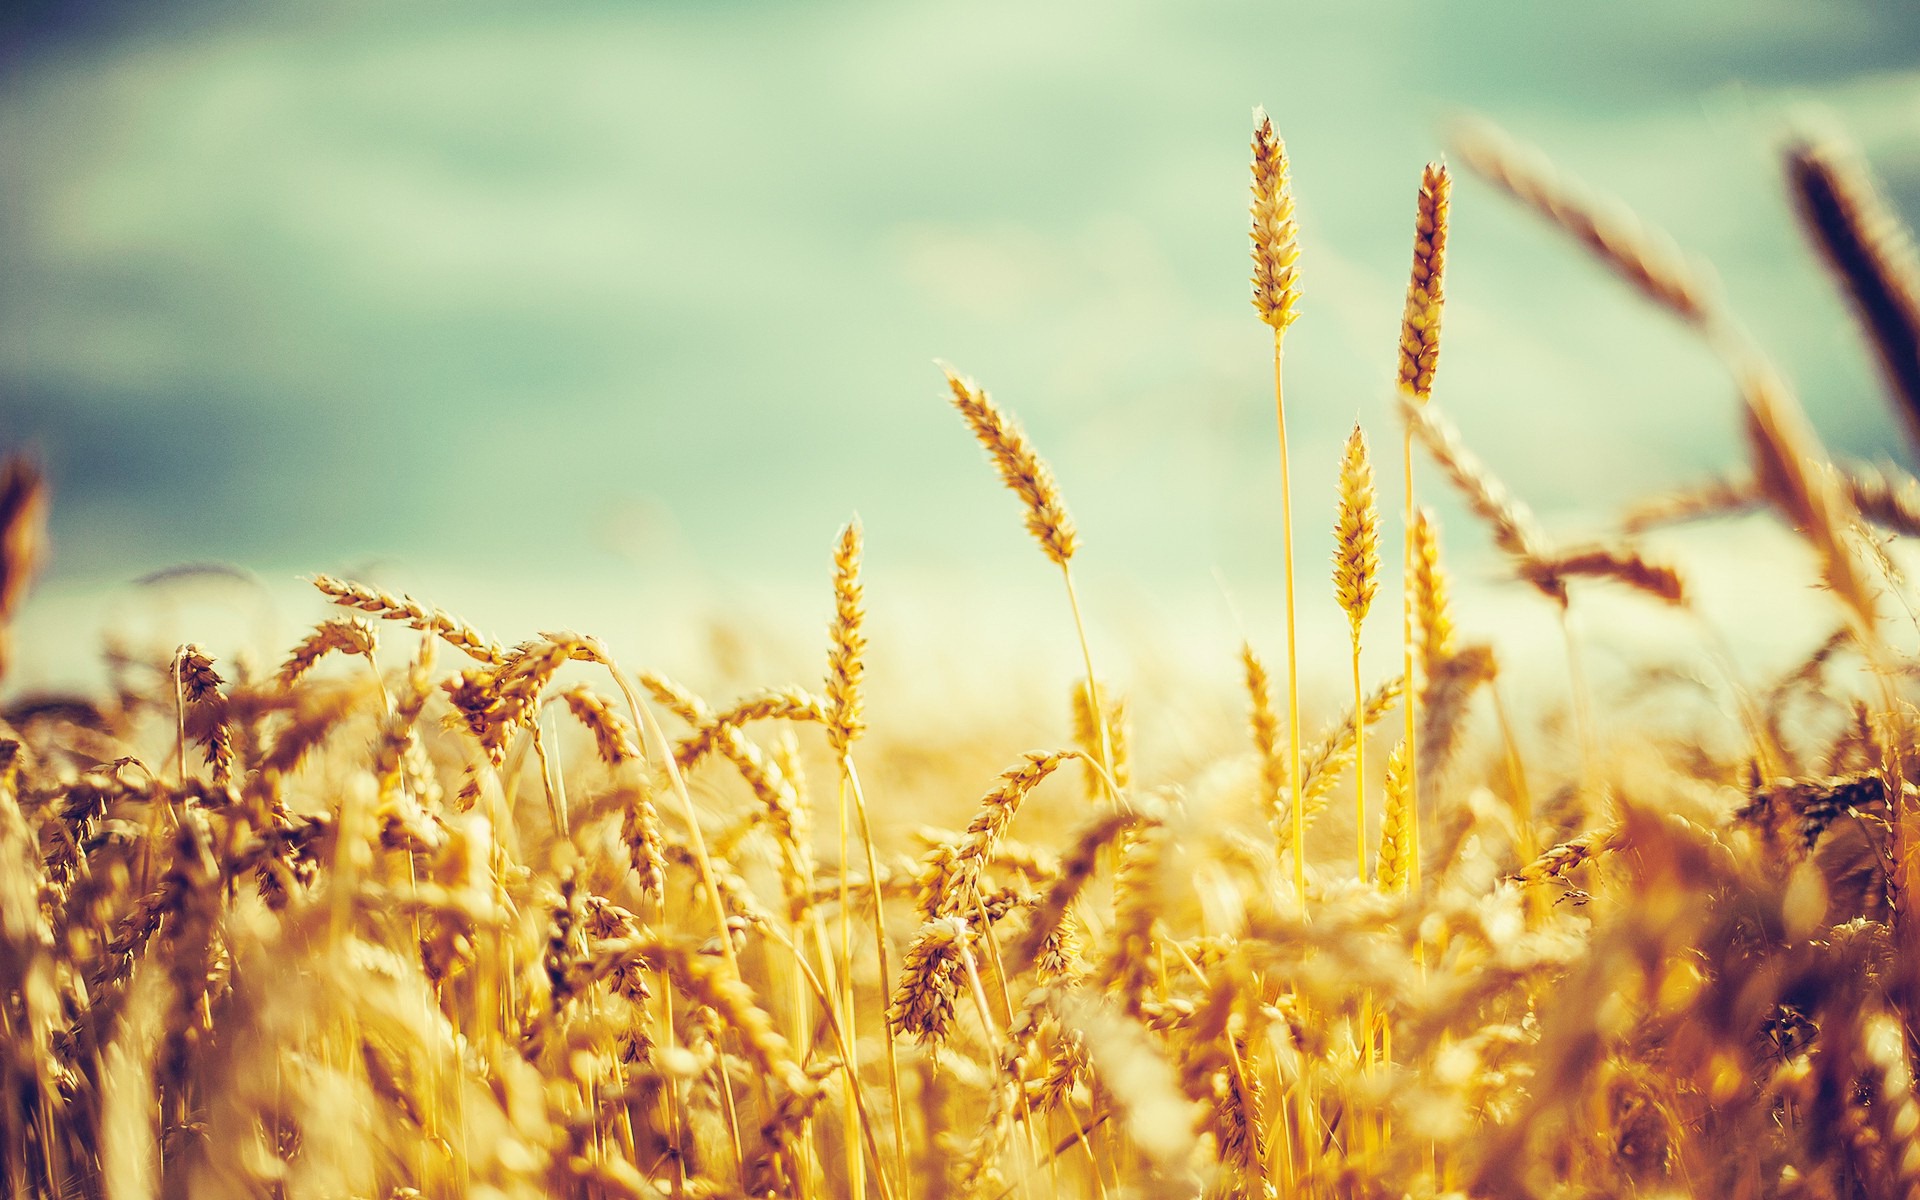 Golden Wheat Vintage Wallpapers - 1920x1200 - 504229